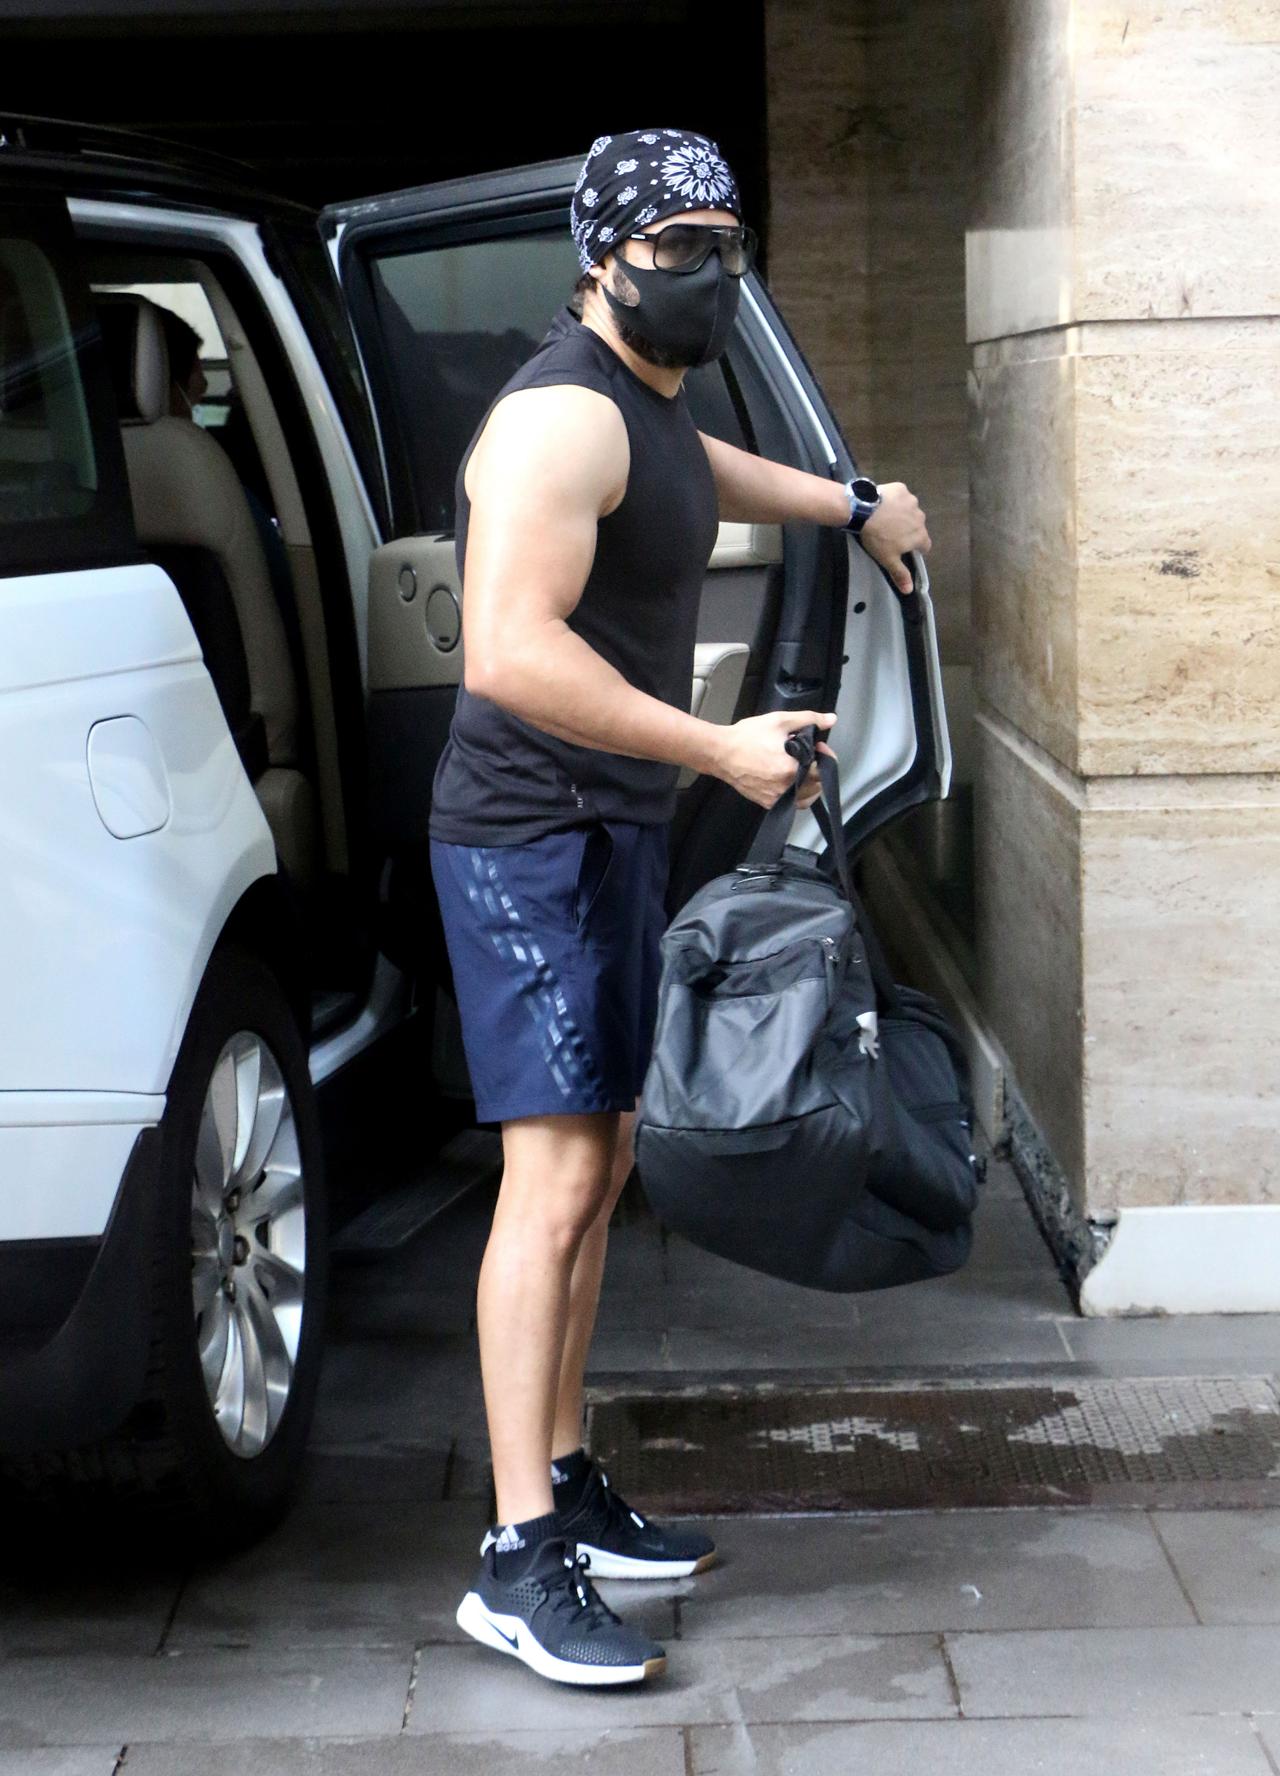 Emraan Hashmi was clicked in Bandra, Mumbai. The actor wore a black vest and blue shorts and also donned a printed bandana and a face mask as a precautionary measure.